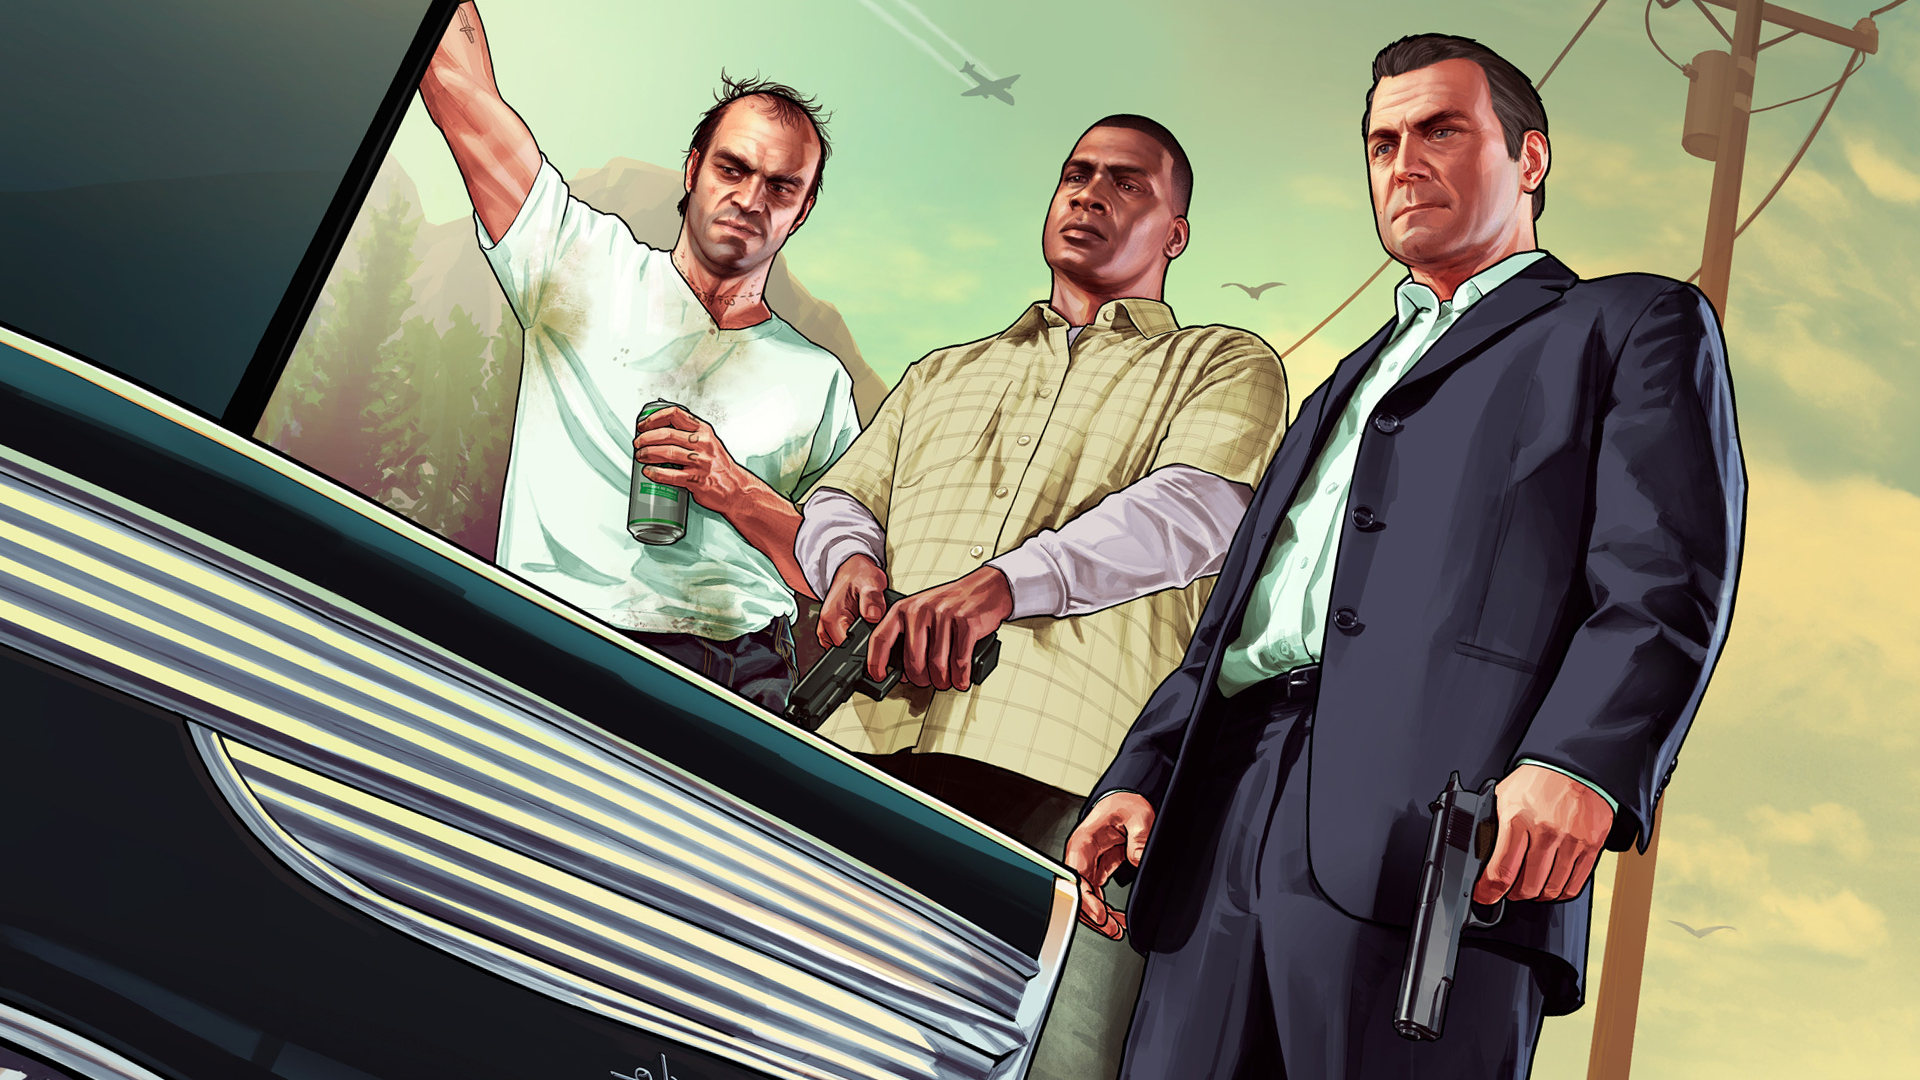 My Free Wallpapers Games Wallpaper Grand Theft Auto V - vrogue.co